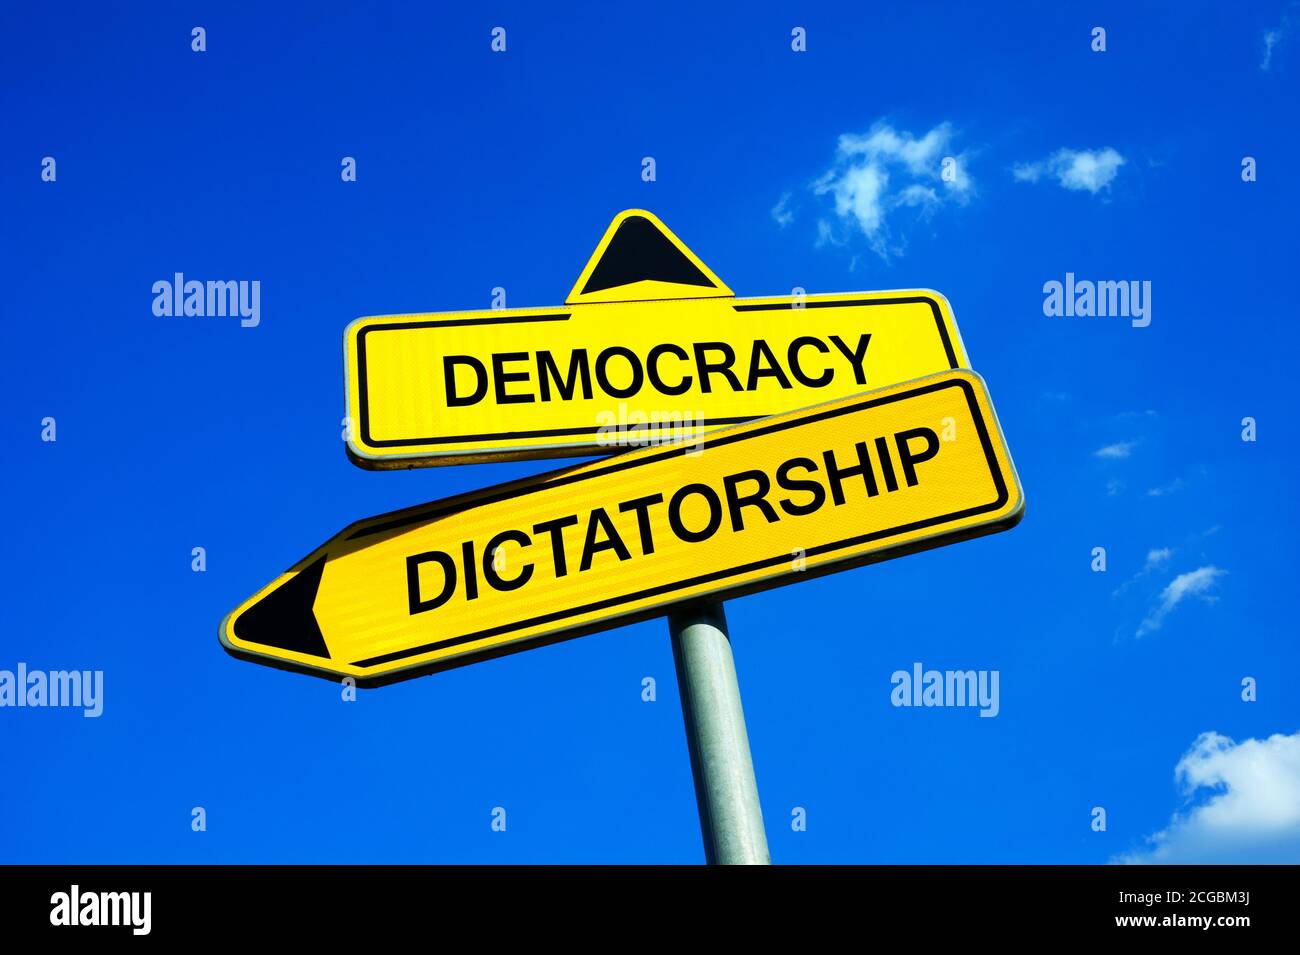 Democracy vs Dictatorship - Traffic sign with two options - democratic election or dictatorship of strong authoritarian ruler with power and dominance Stock Photo